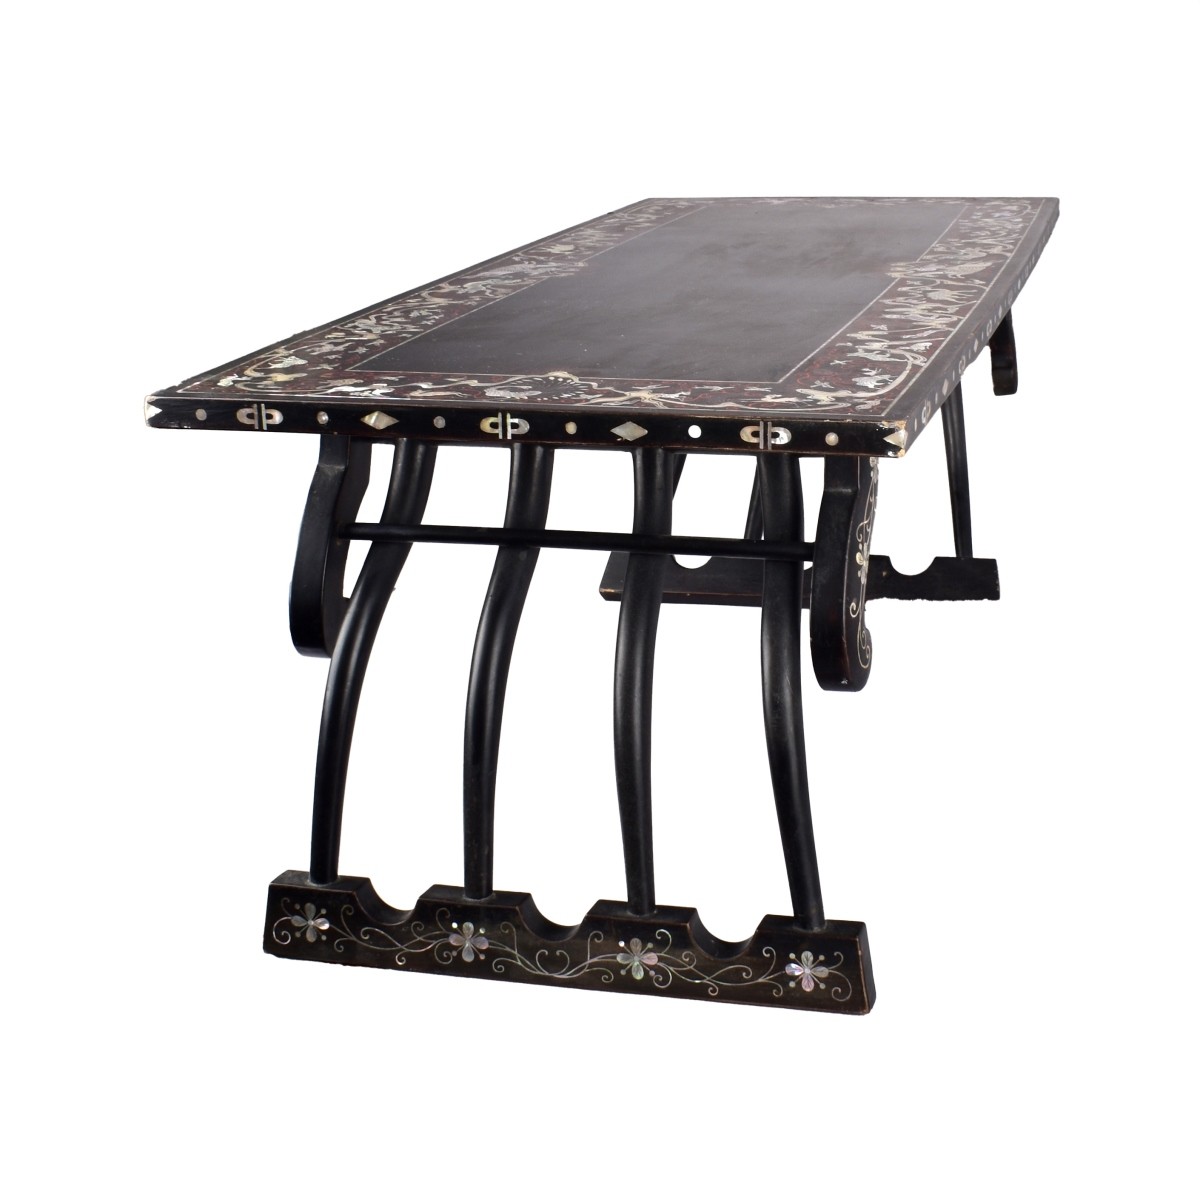 Chinese MOP Inlaid Low Altar Table